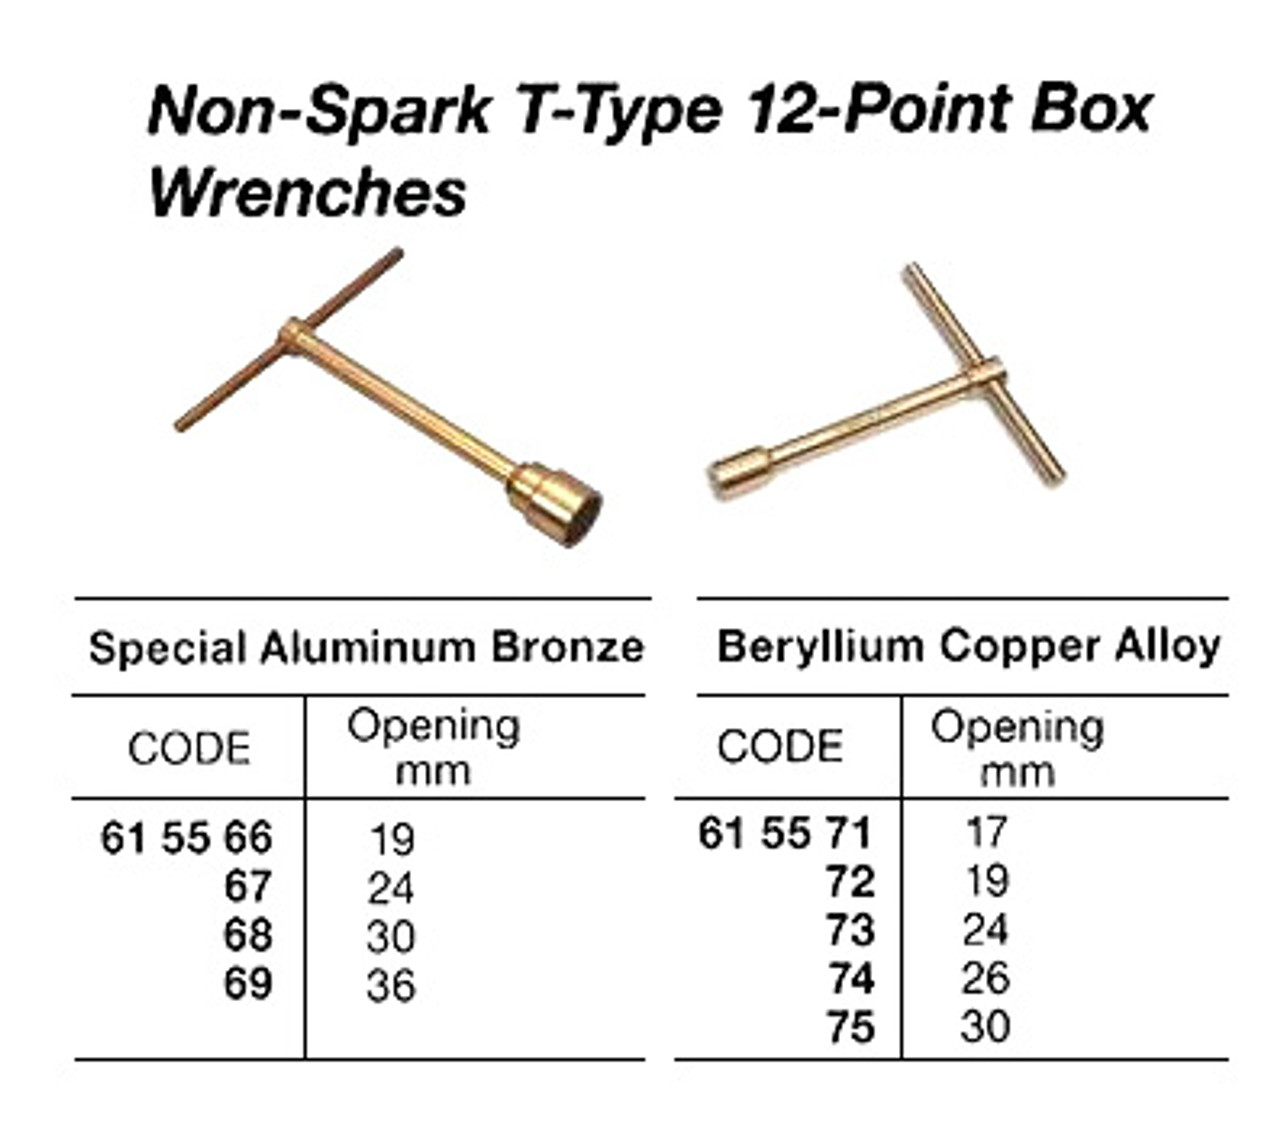 IMPA 615567 WRENCH SOCKET WITH T-HANDLE 24mm ALU-BRONZE NON-SPARK